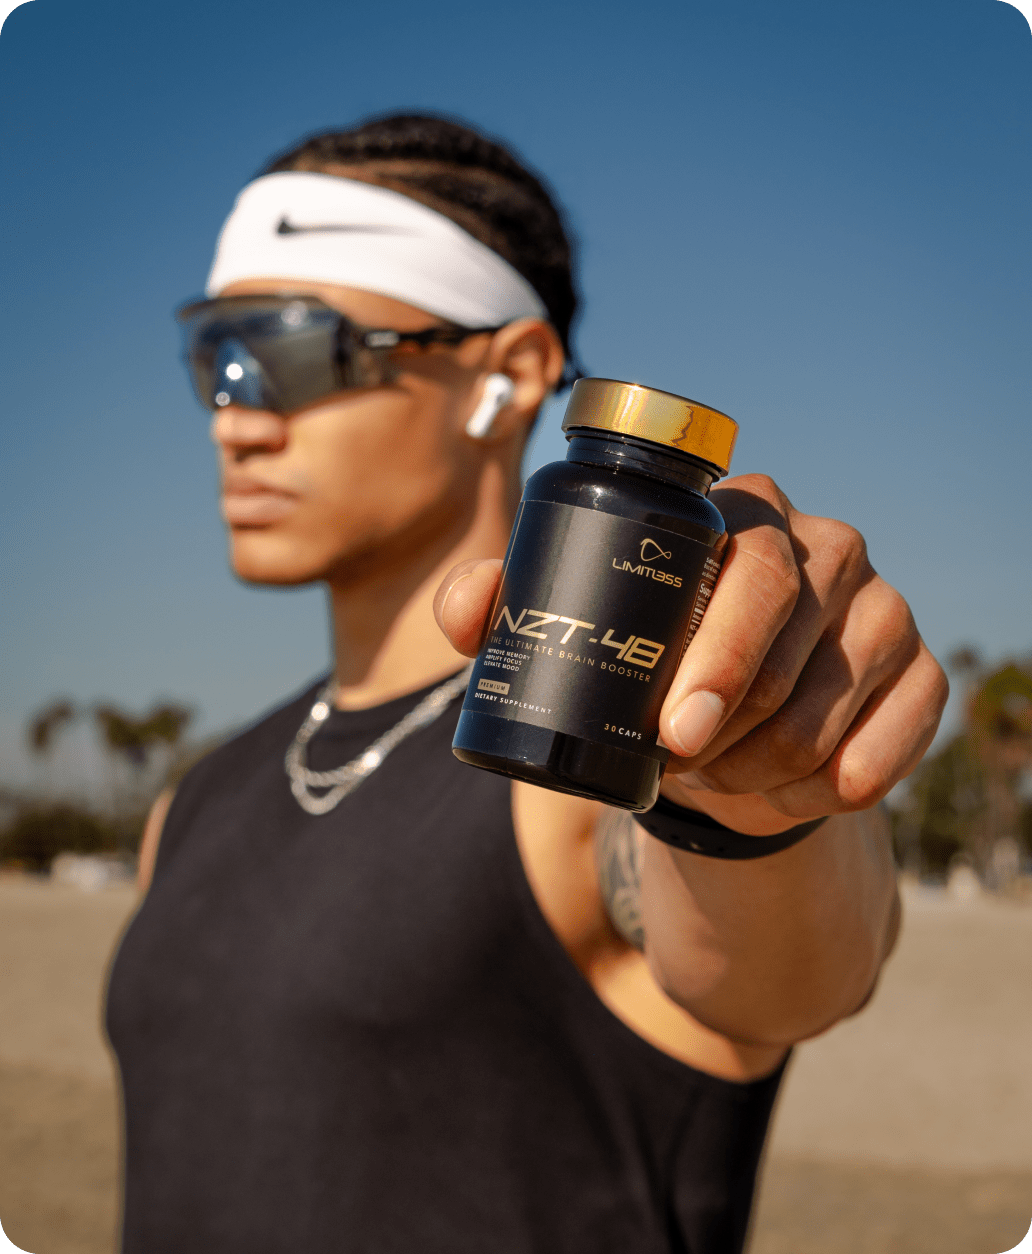 <p><strong>✅ All-day energy </strong>without the crash</p><p><strong>✅ Performance levels boosted </strong></p><p><strong>✅ Your brain supercharged </strong>to take on just about anything in life</p>